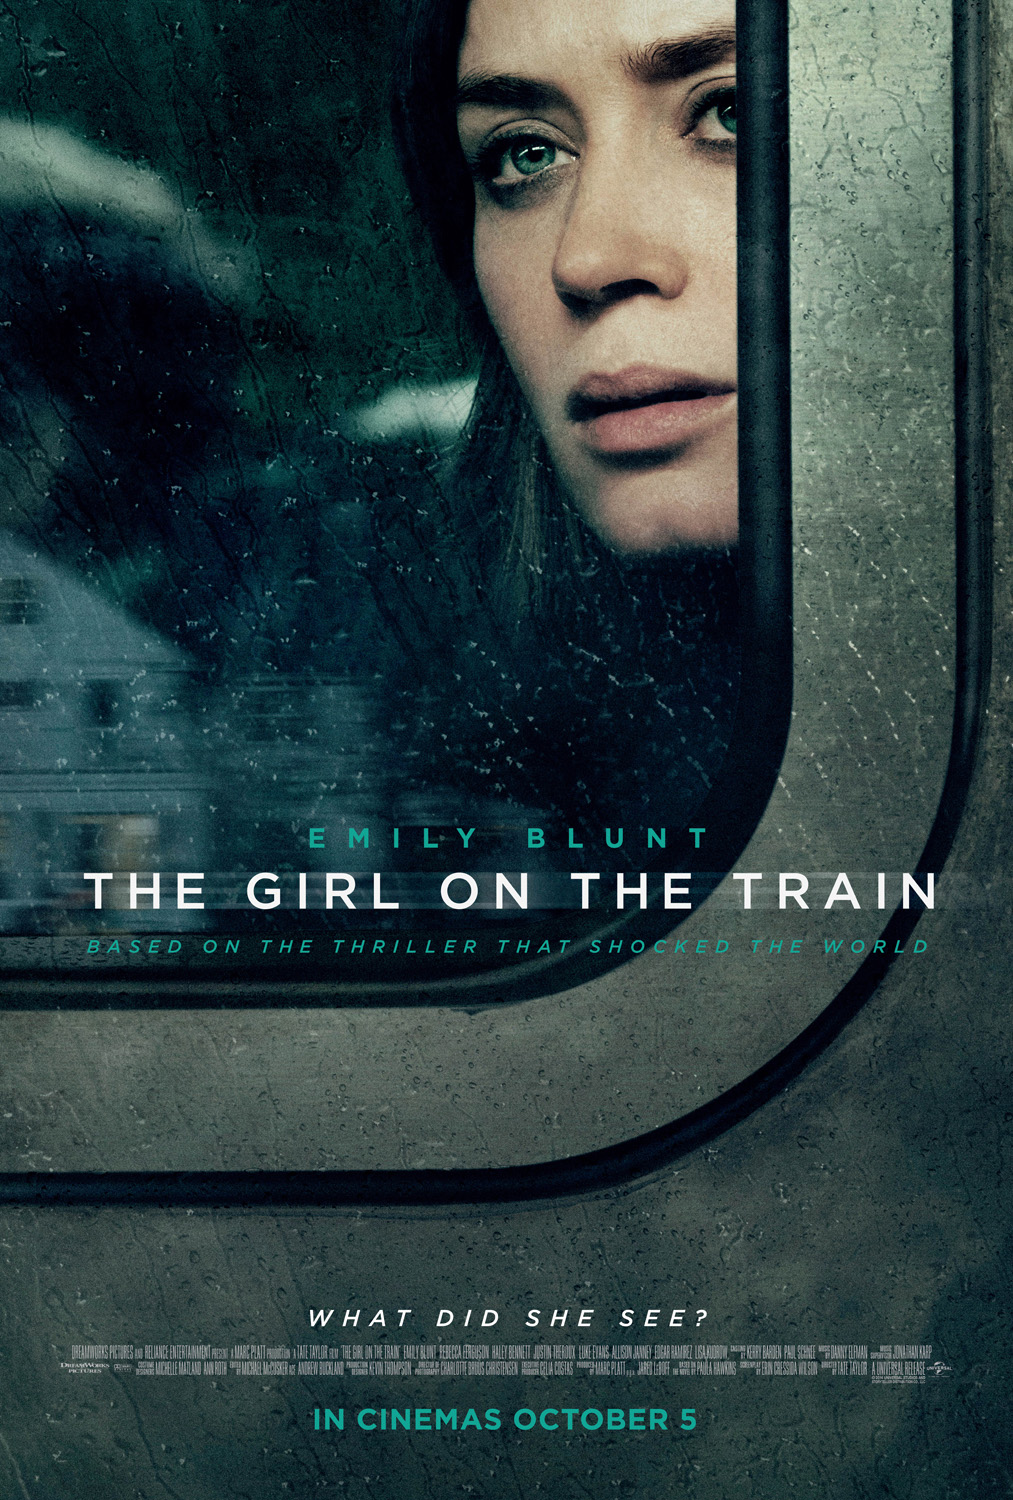 “THE GIRL ON THE TRAIN” peeks through the window in new poster